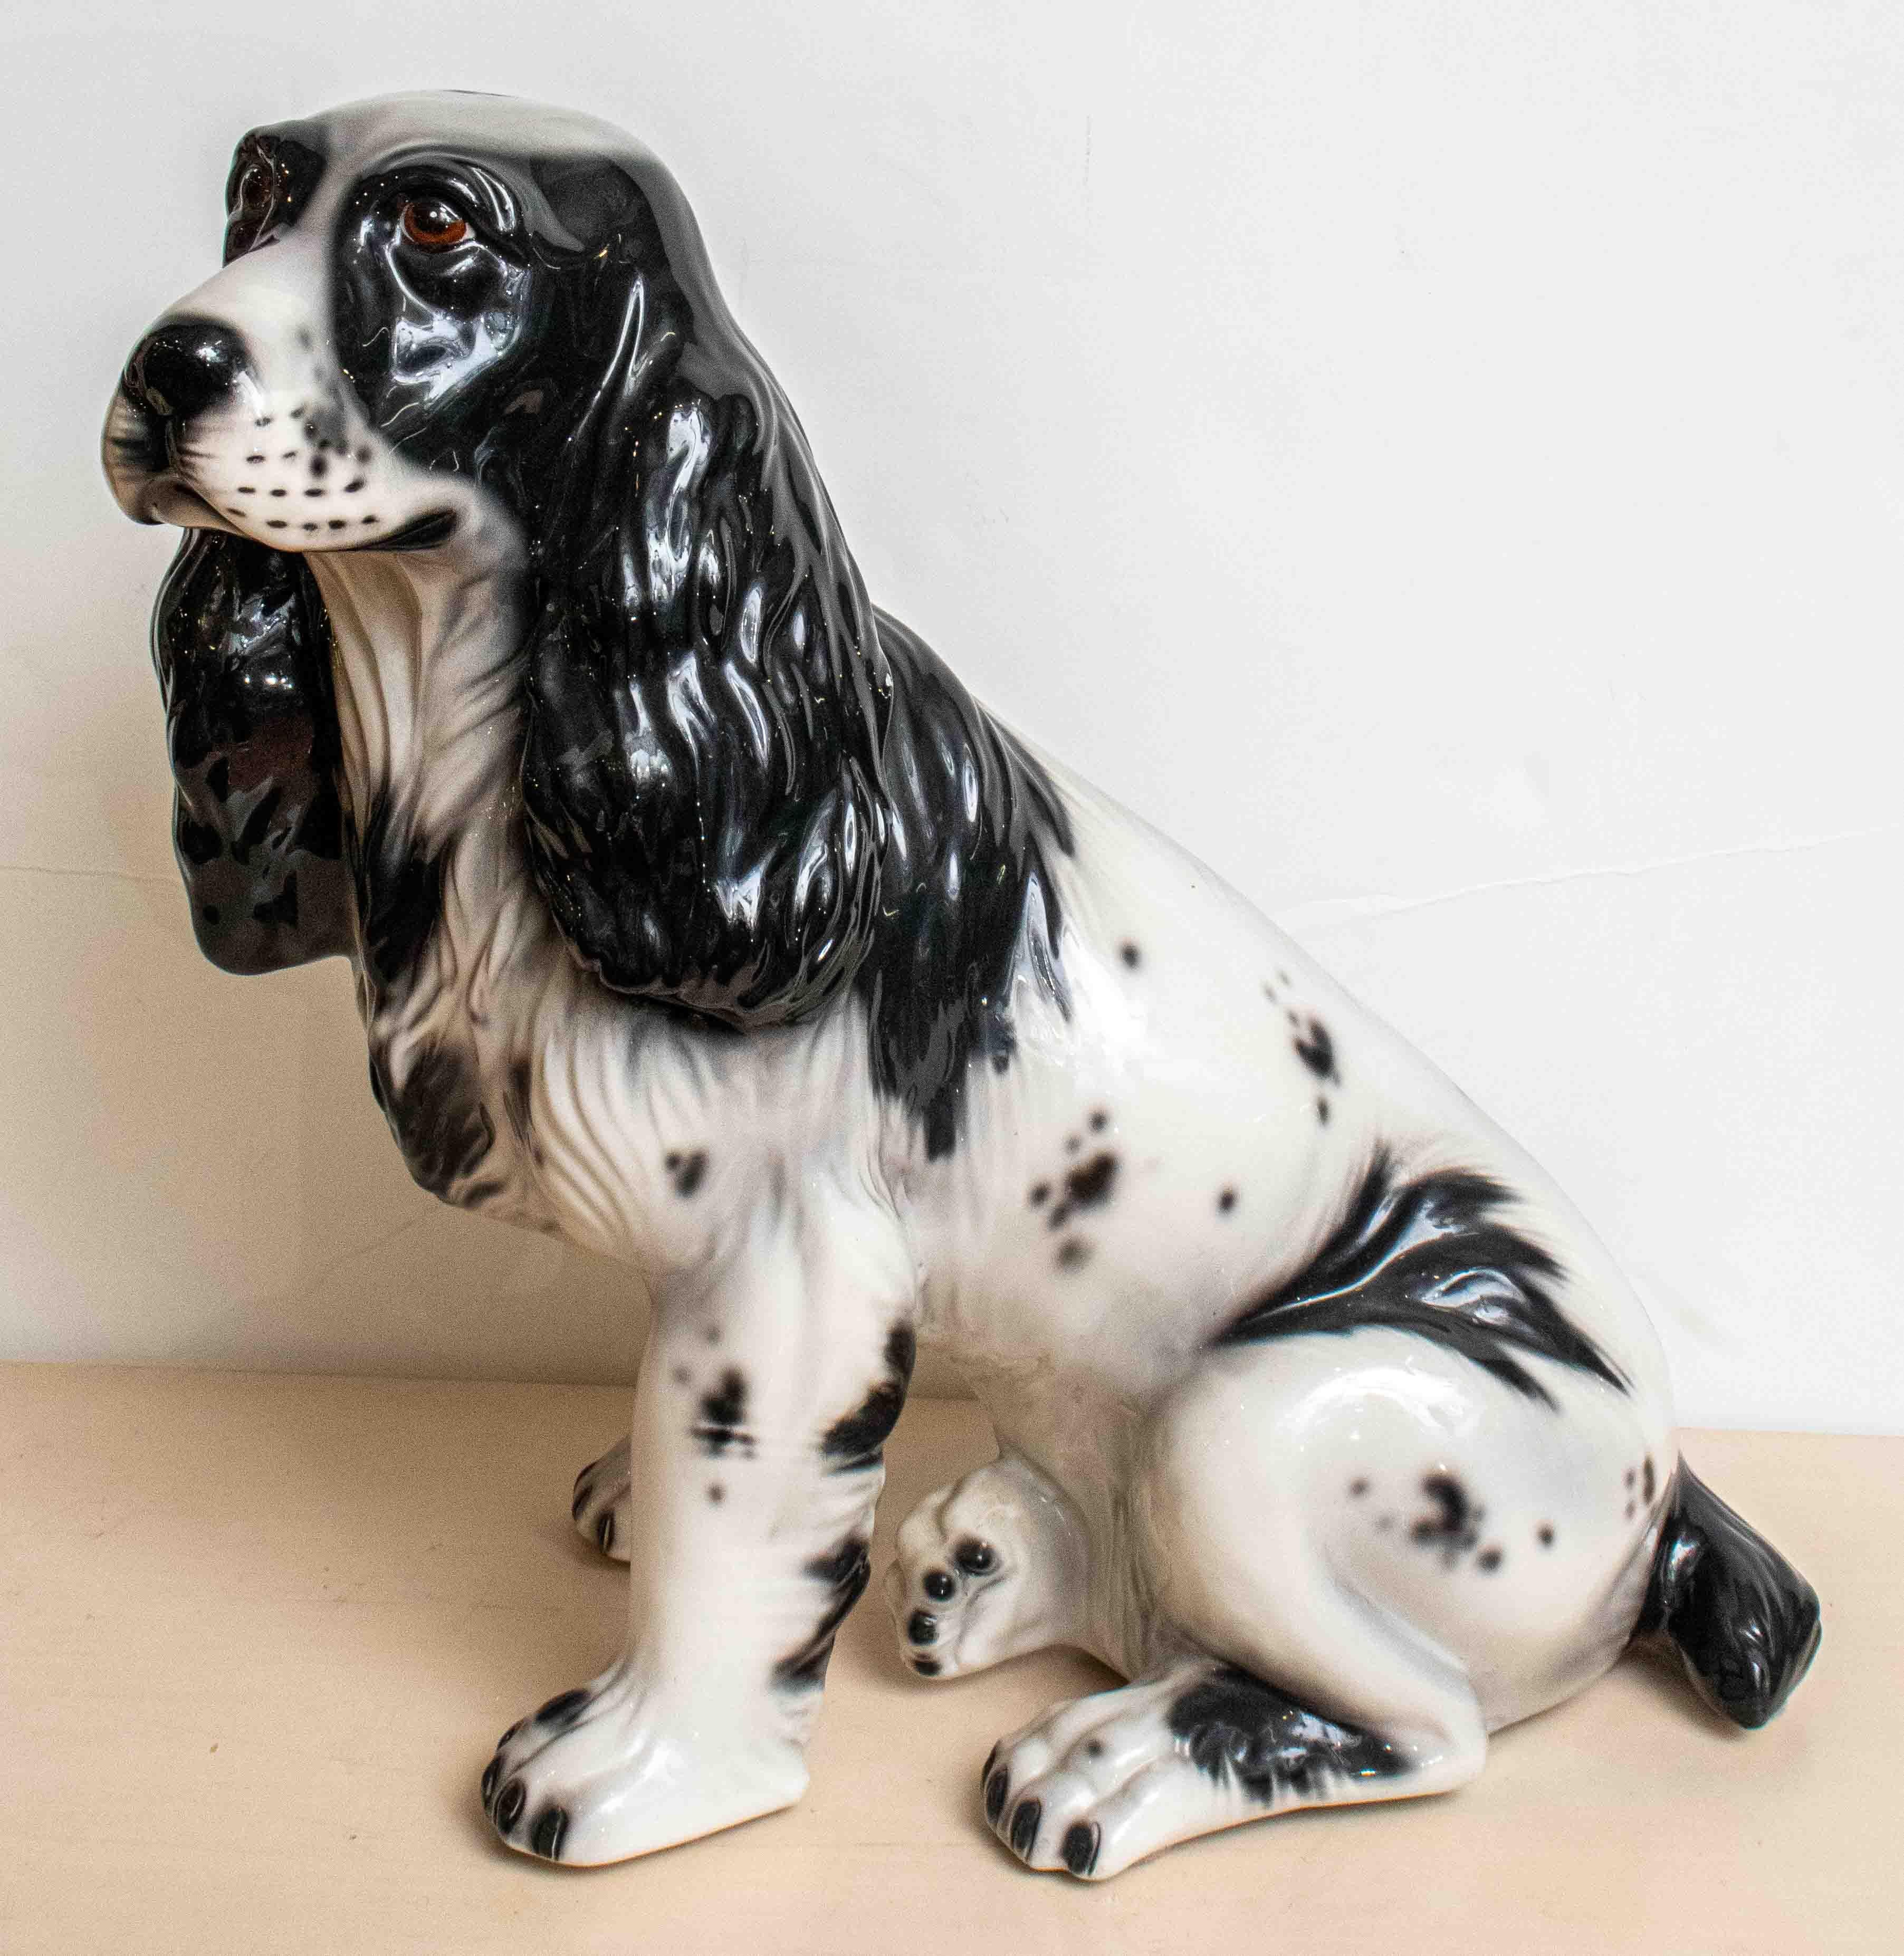 Charming 1950s Italian ceramic dog of a spaniel. Beautiful glazed black and white coloration. Nice details on the face and body.